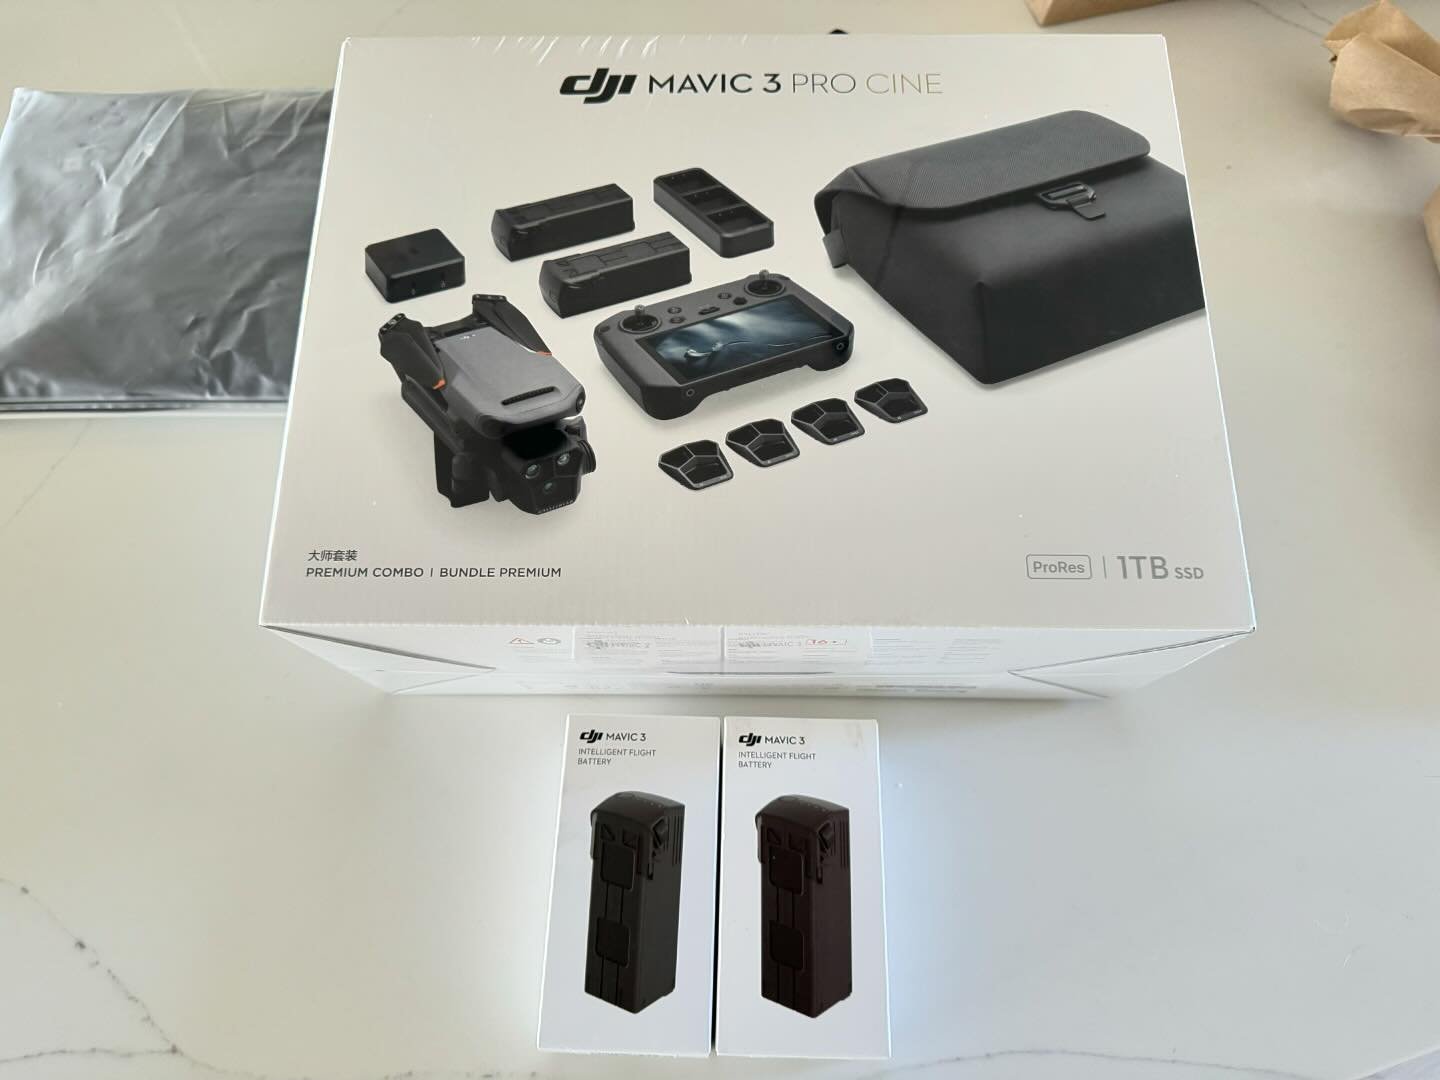 Just added another Mavic 3 Pro Cine to our fleet these little drones are workhorses and are constantly out on jobs. We love our @djiglobal products!